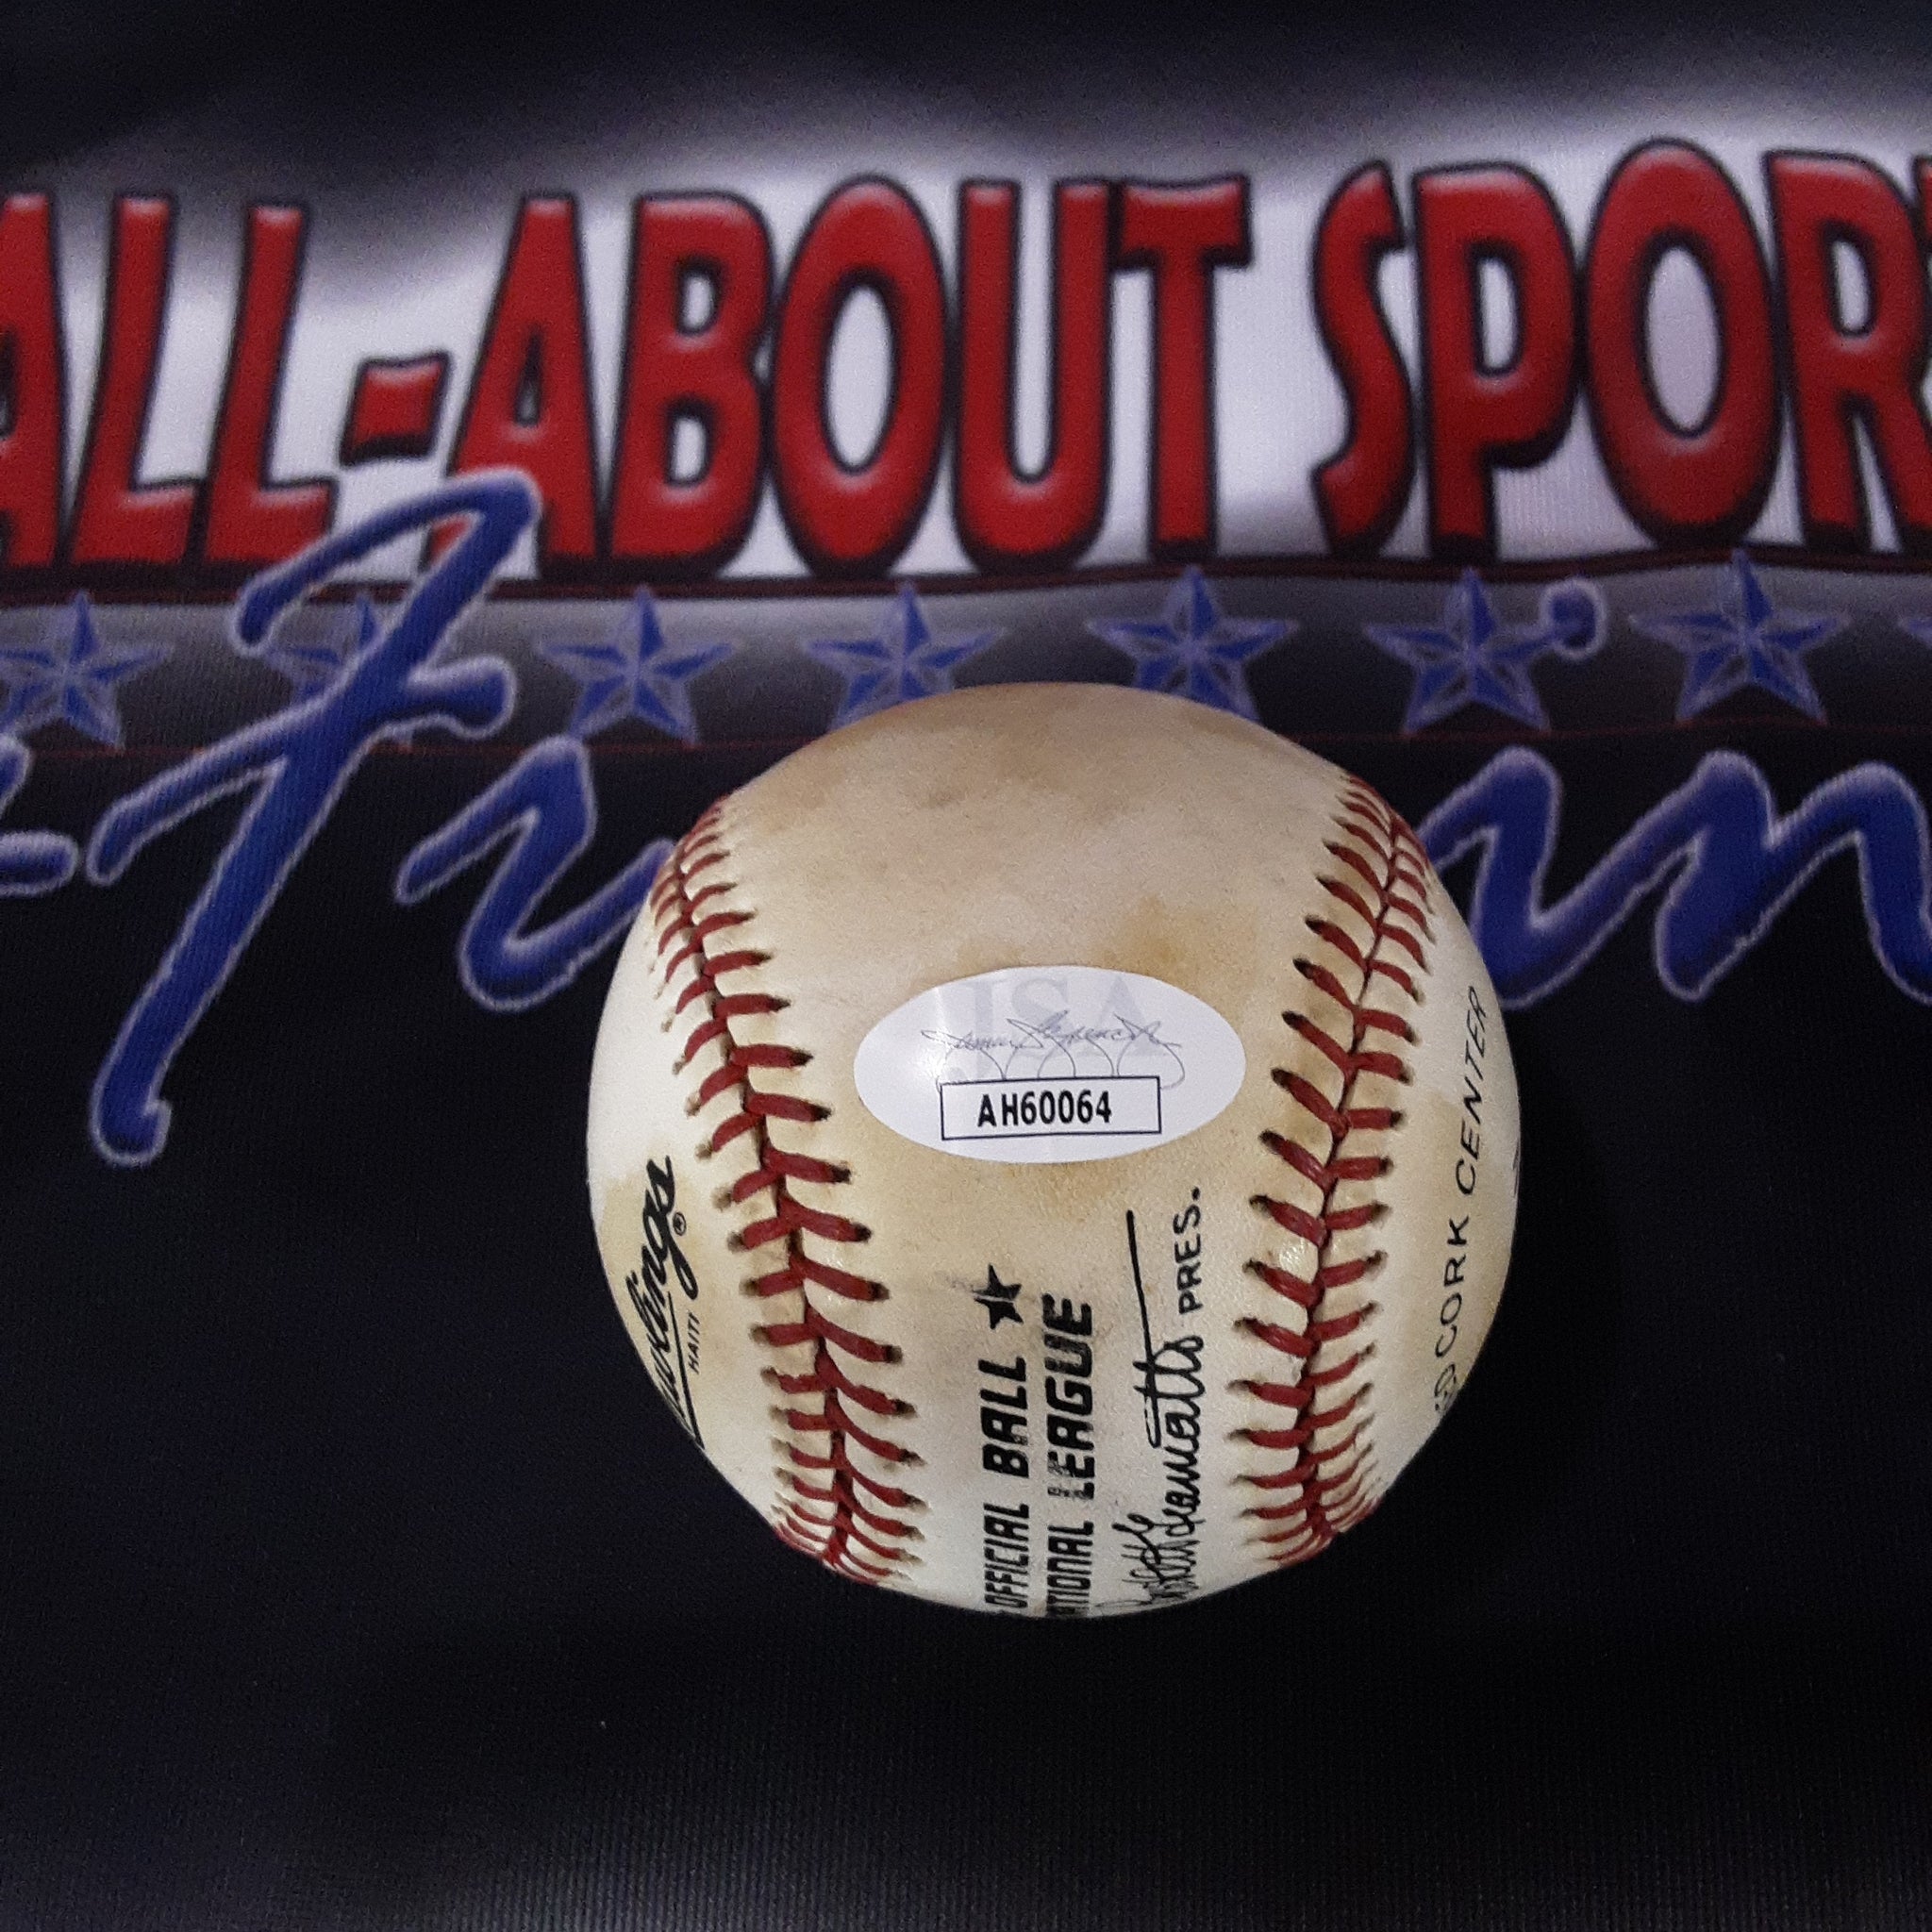 Andre Dawson Authentic Signed Baseball Autographed JSA.